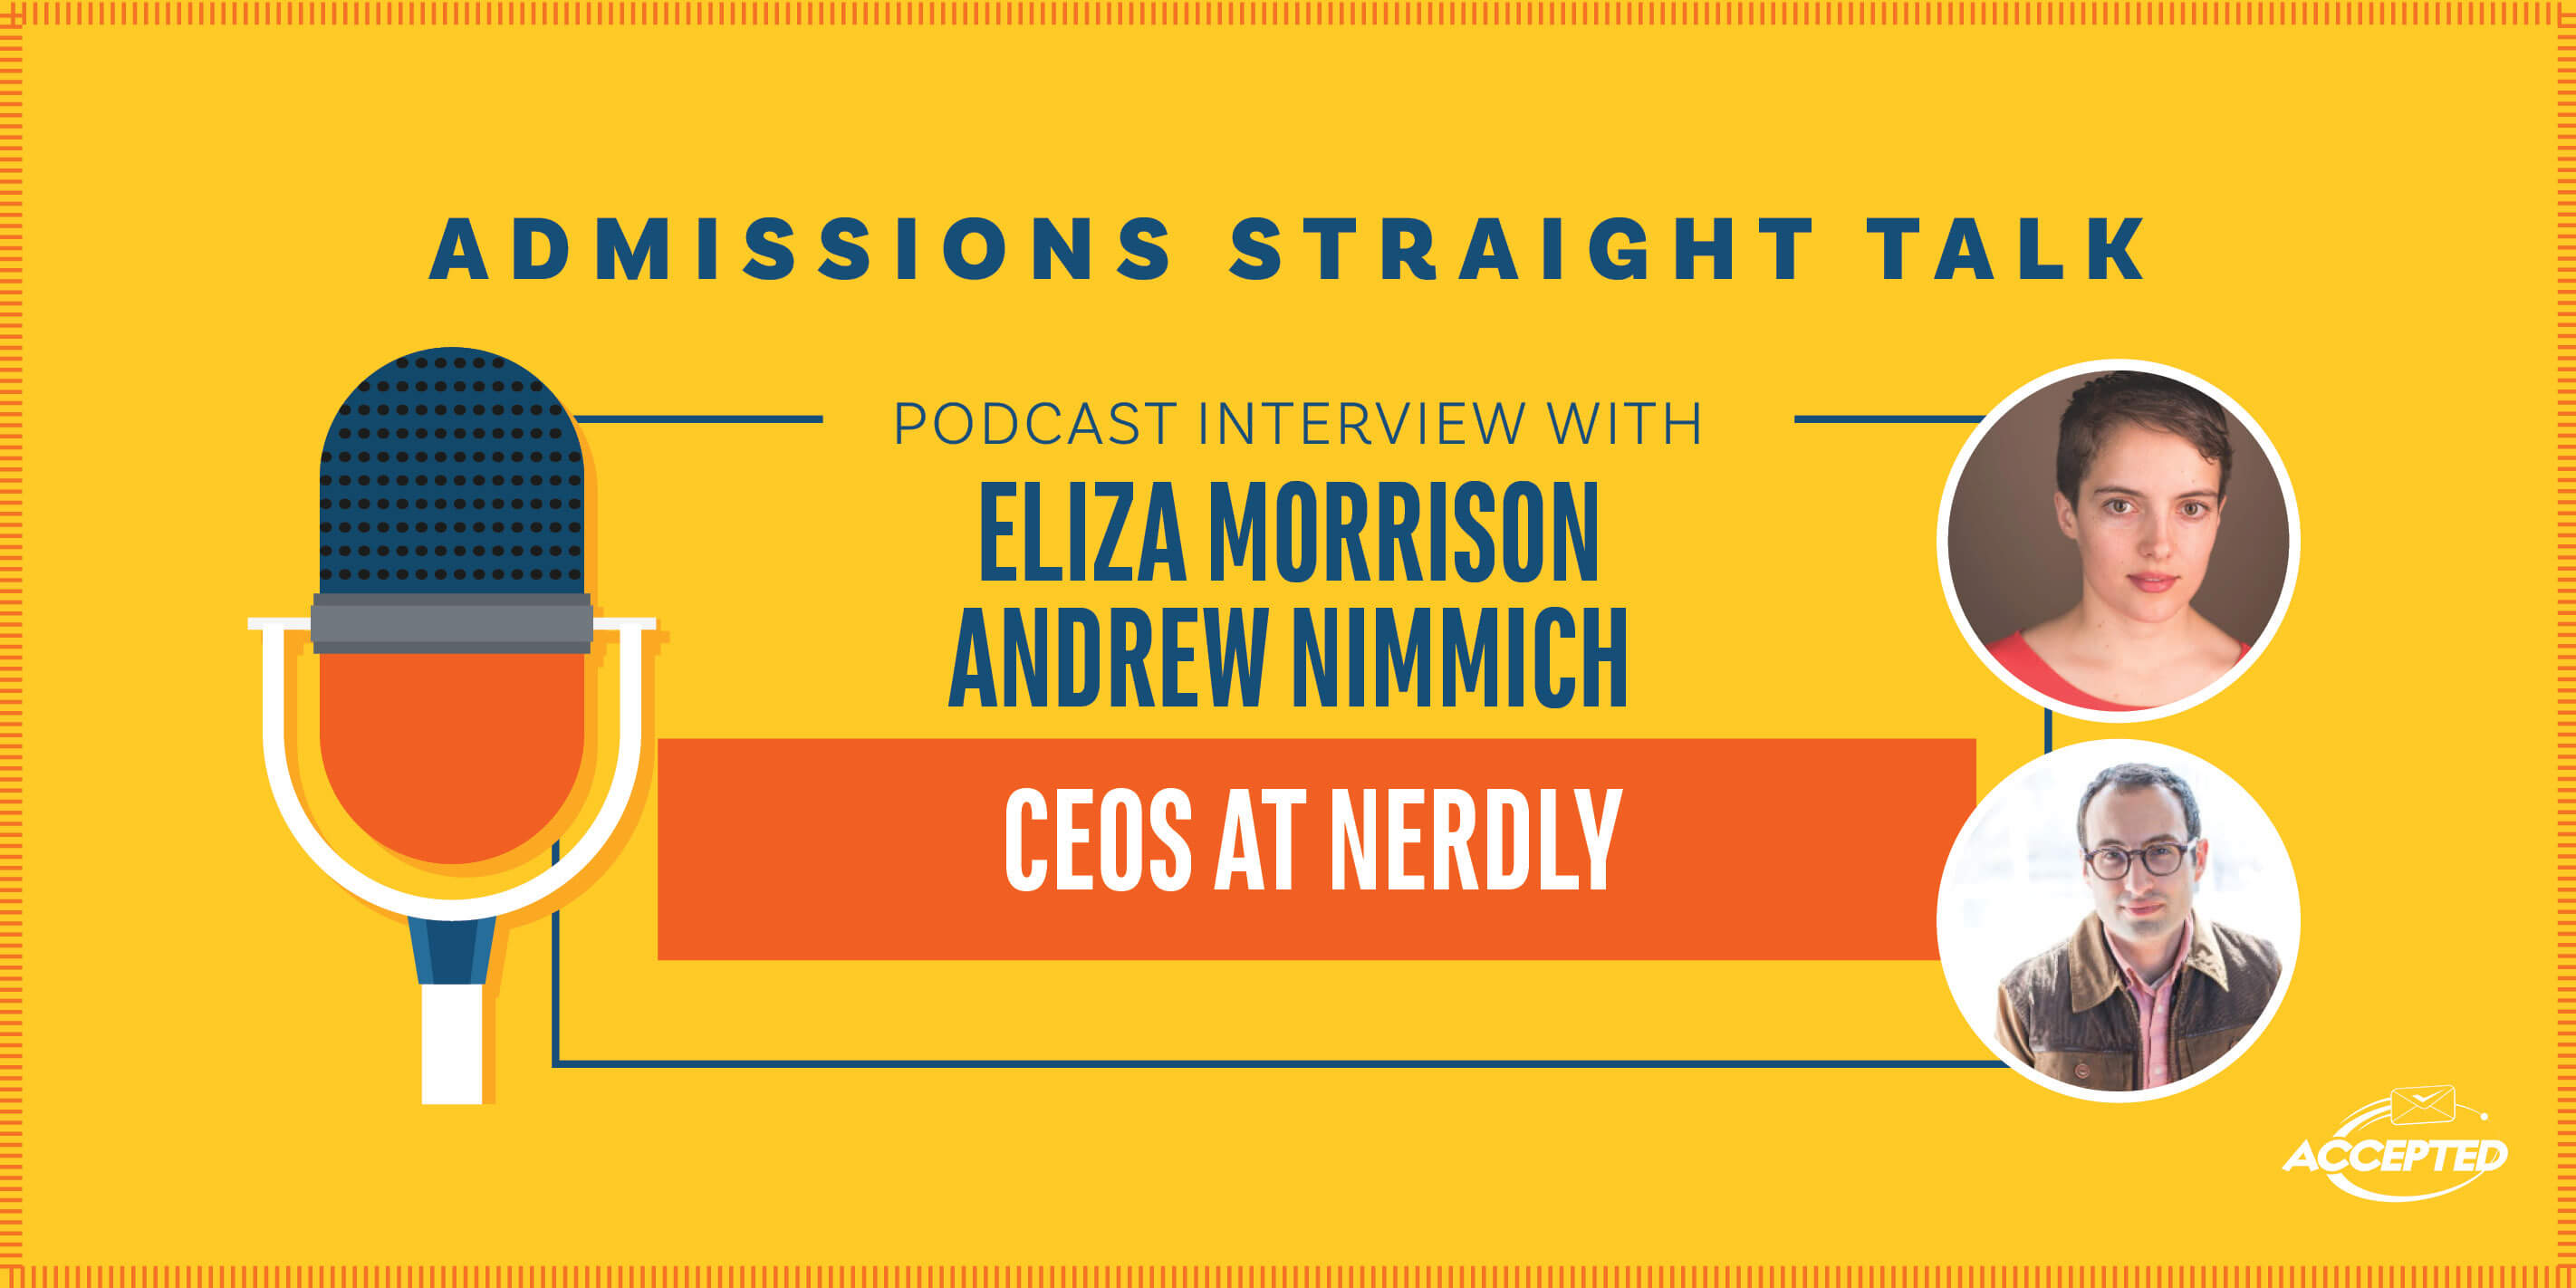 Interview with Nerdly CEOs Eliza Morrison Andrew Nimmich